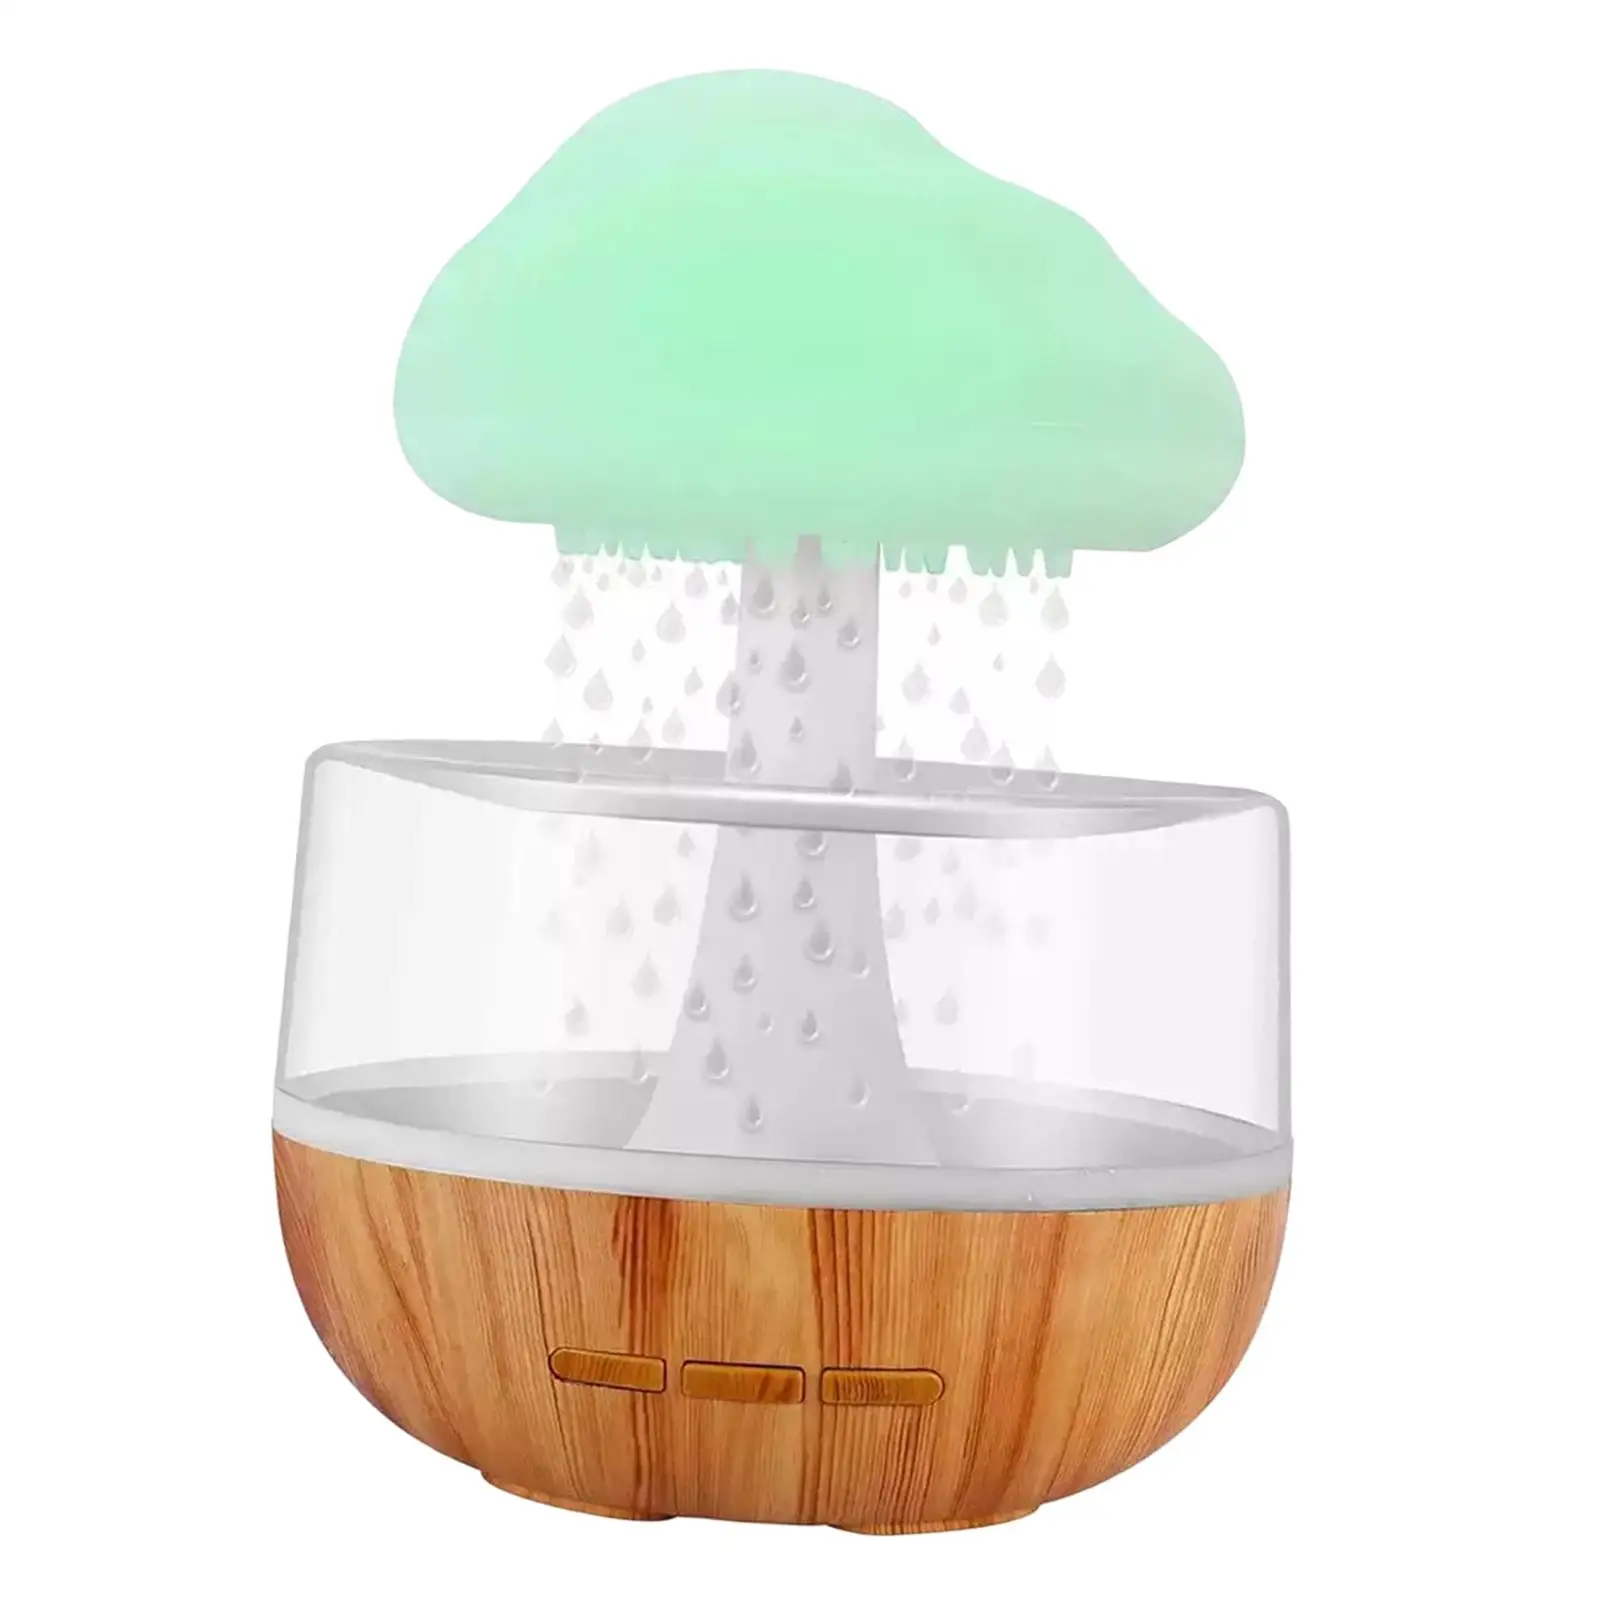 Colorful Air Humidifier Decor Centerpieces Quiet Scene Layout Air Purifier with Light Diffuser for Bedroom Desktop